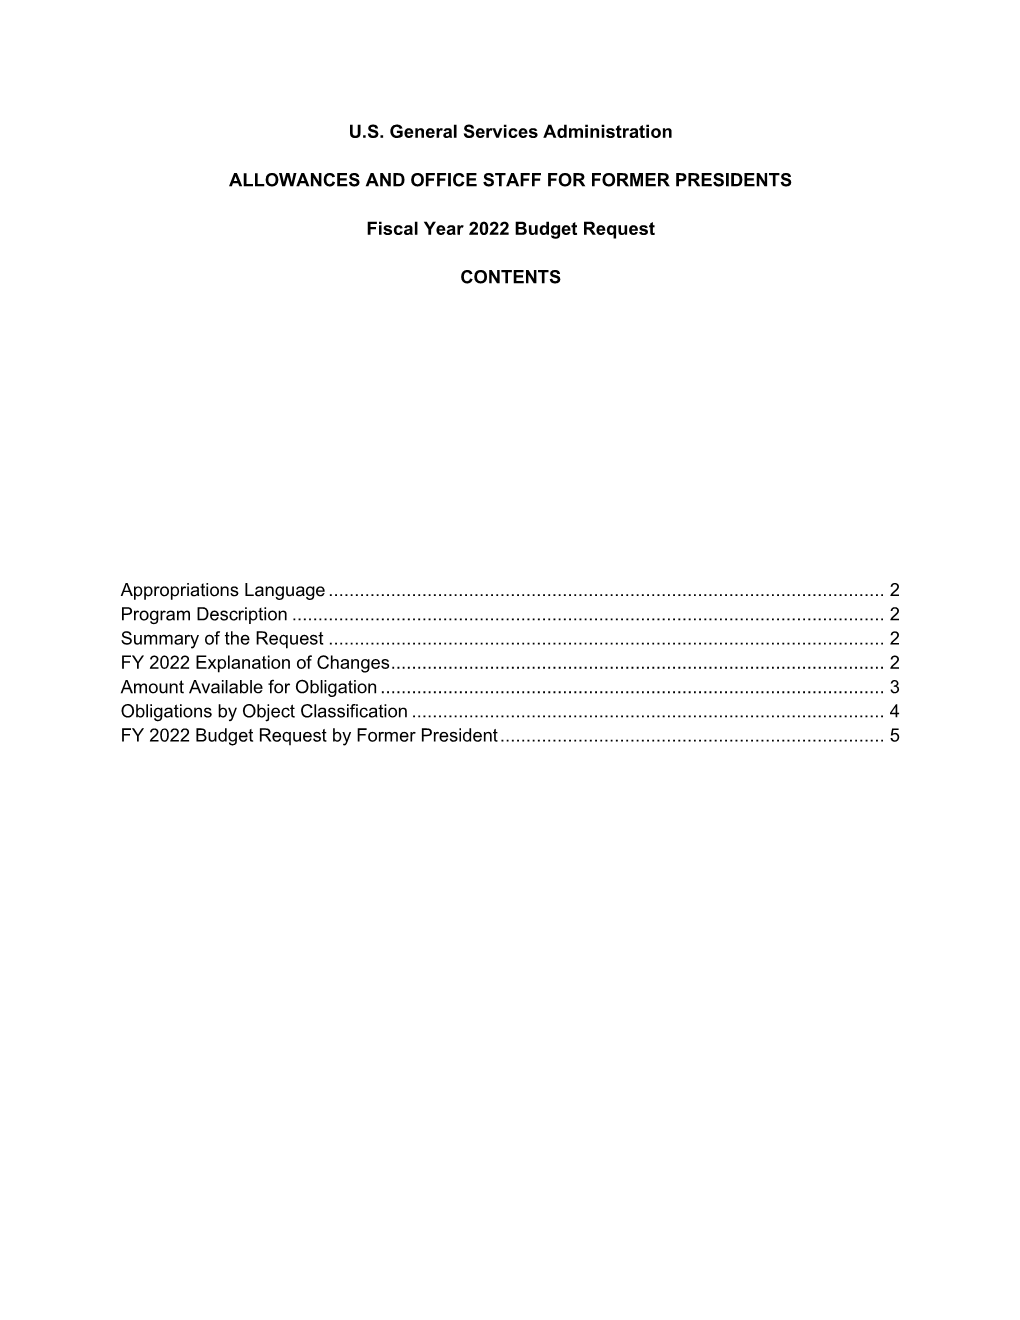 U.S. General Services Administration Allowances and Office Staff for Former Presidents